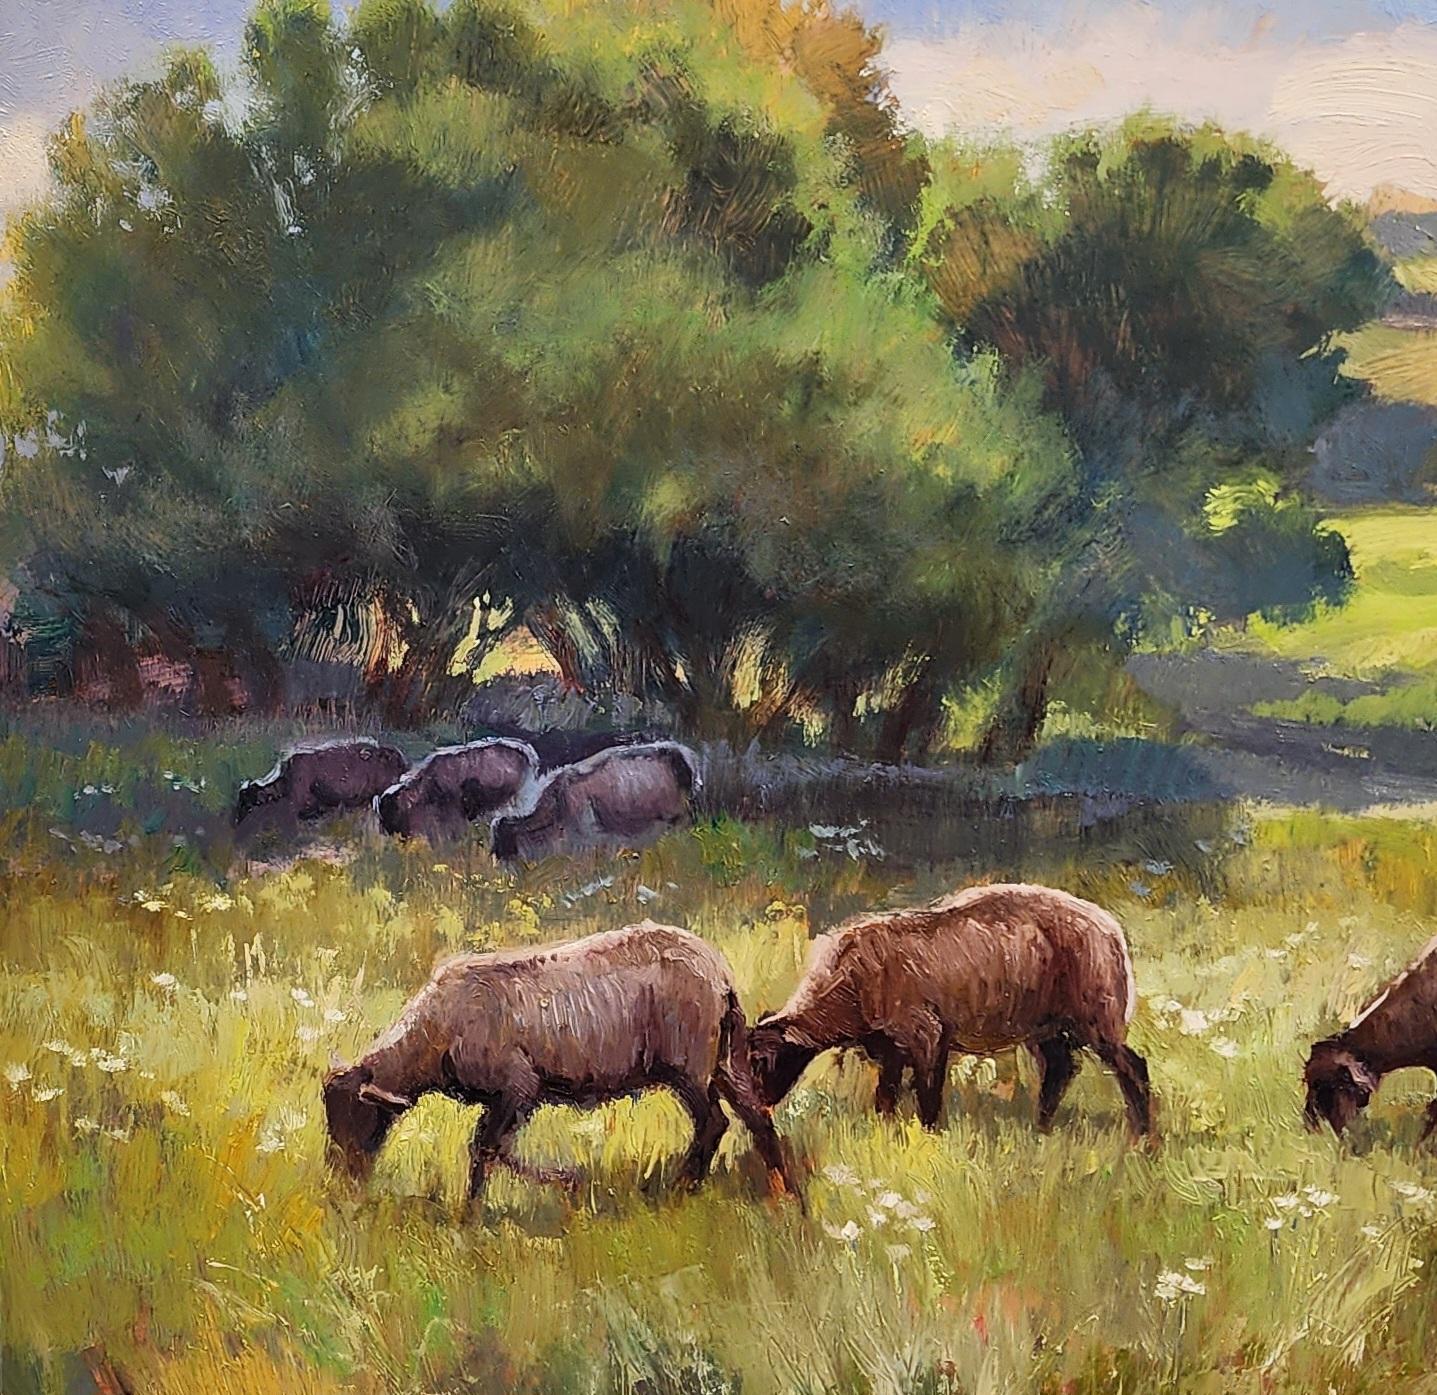 ONE FLOCK LISTENS  Impressionism, Landscape, Sheep, Plein Aire - American Impressionist Painting by Virginia Vaughan 